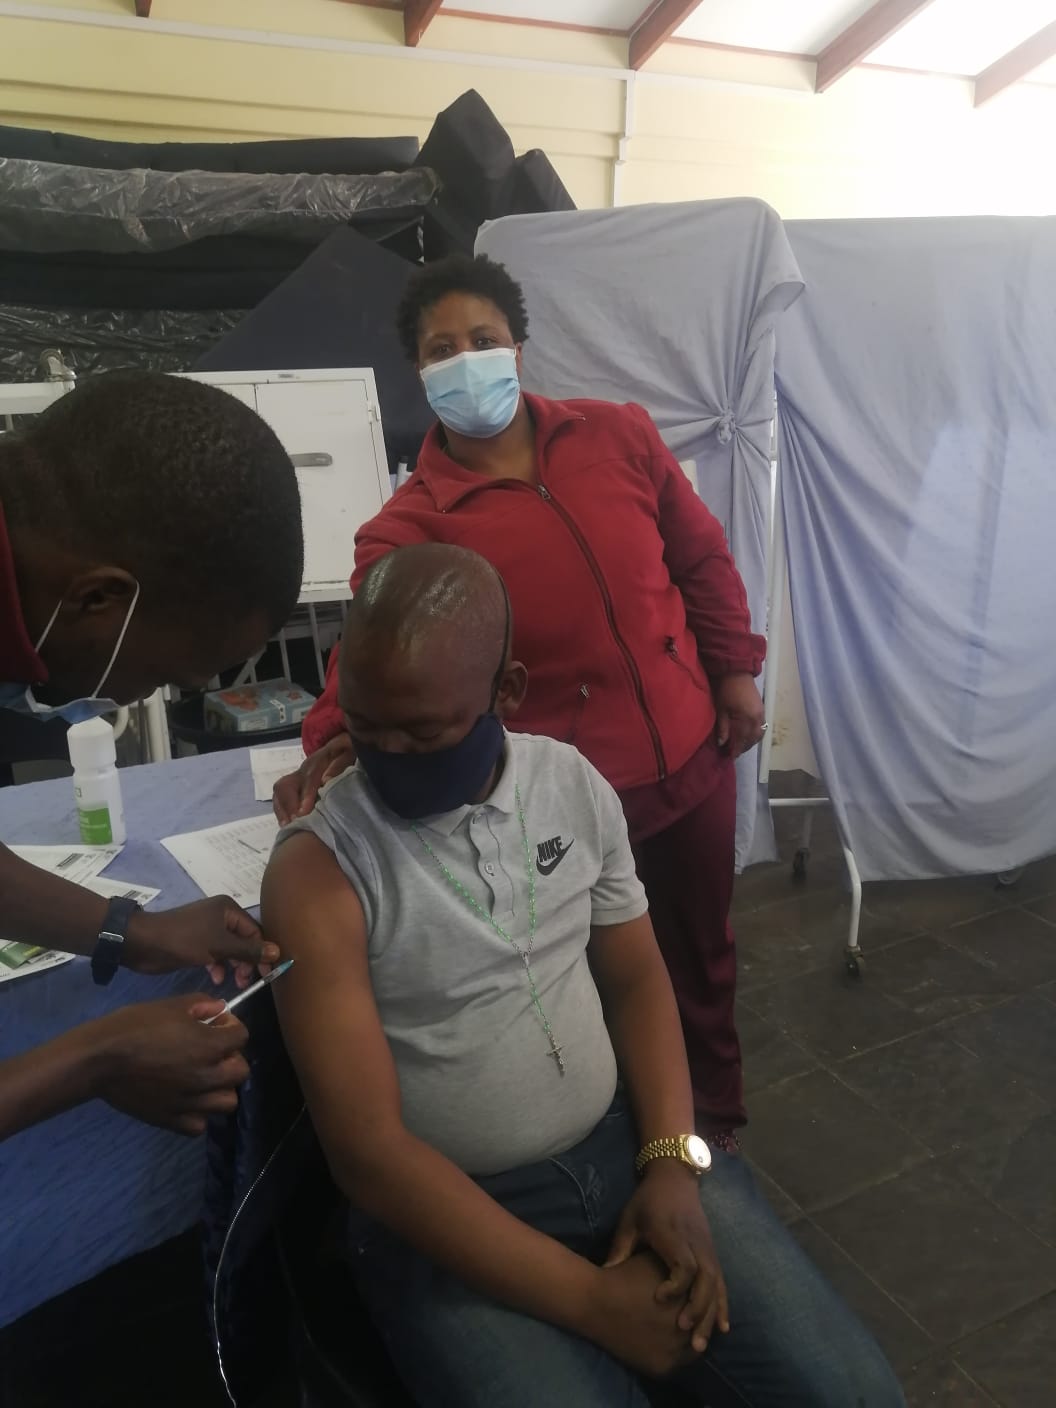 Traditional leaders and pastors push for people to get their Covid vaccine